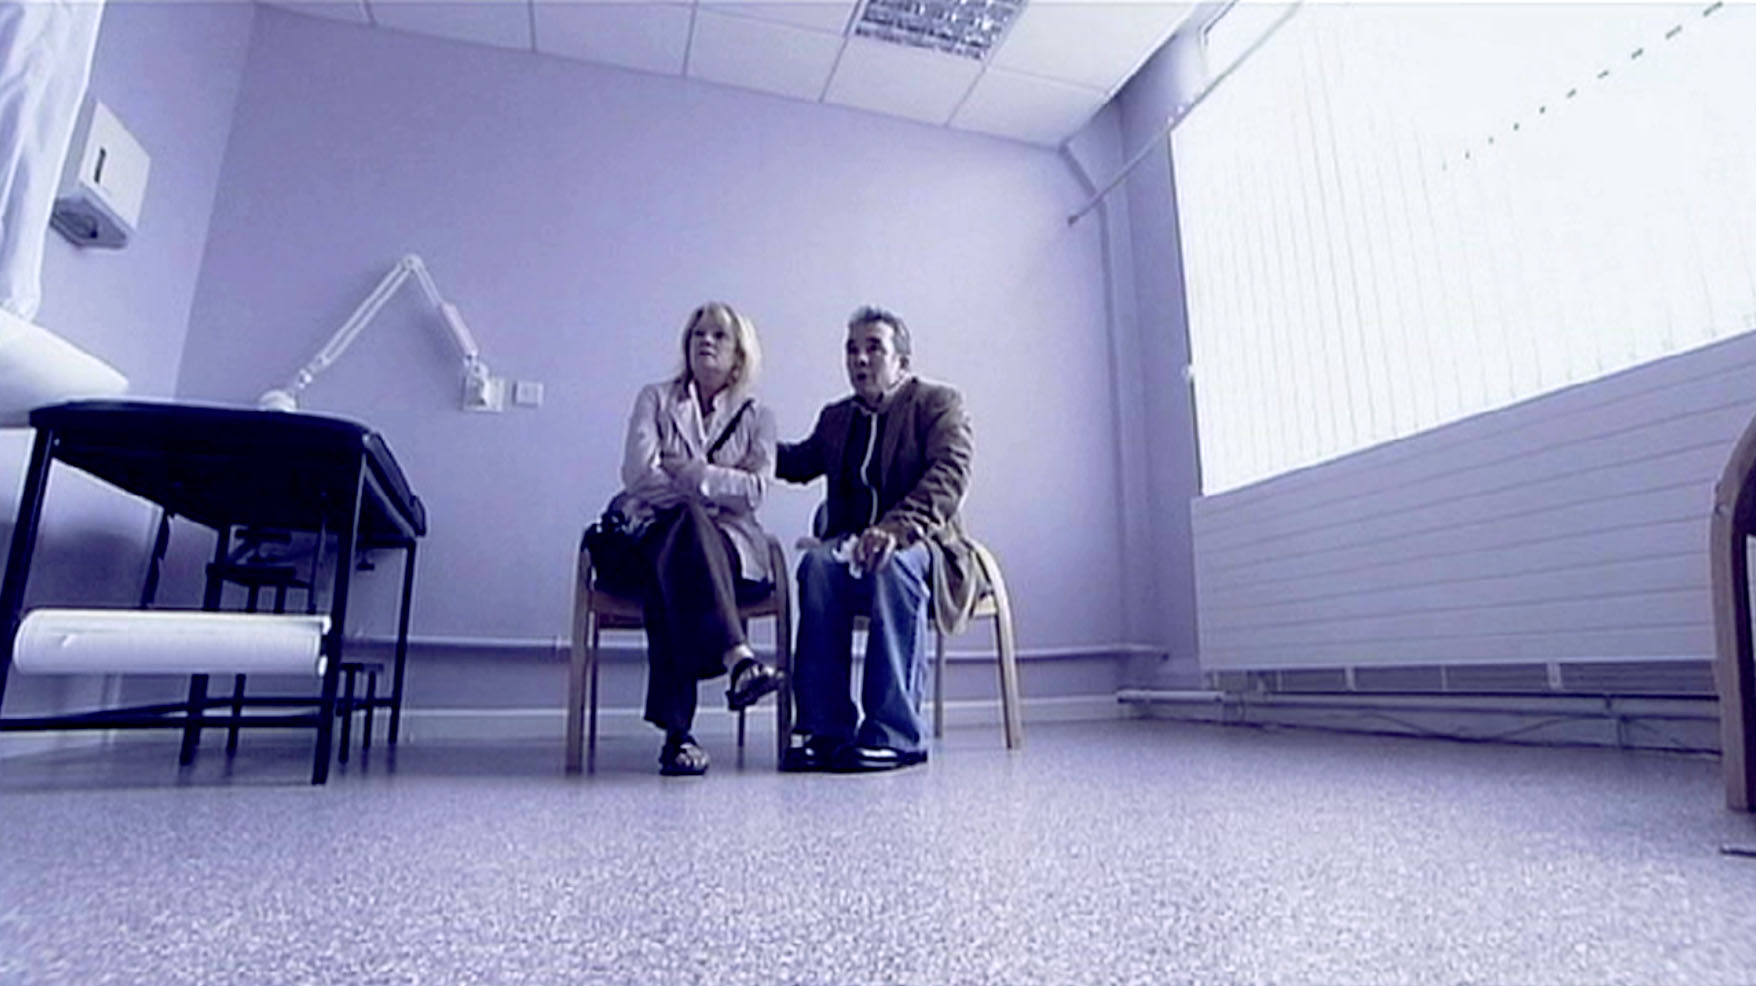 Still image 4 from video on teen mental health by Stephen S T Bradley for veetoo, a video production company in Belfast, Northern Ireland